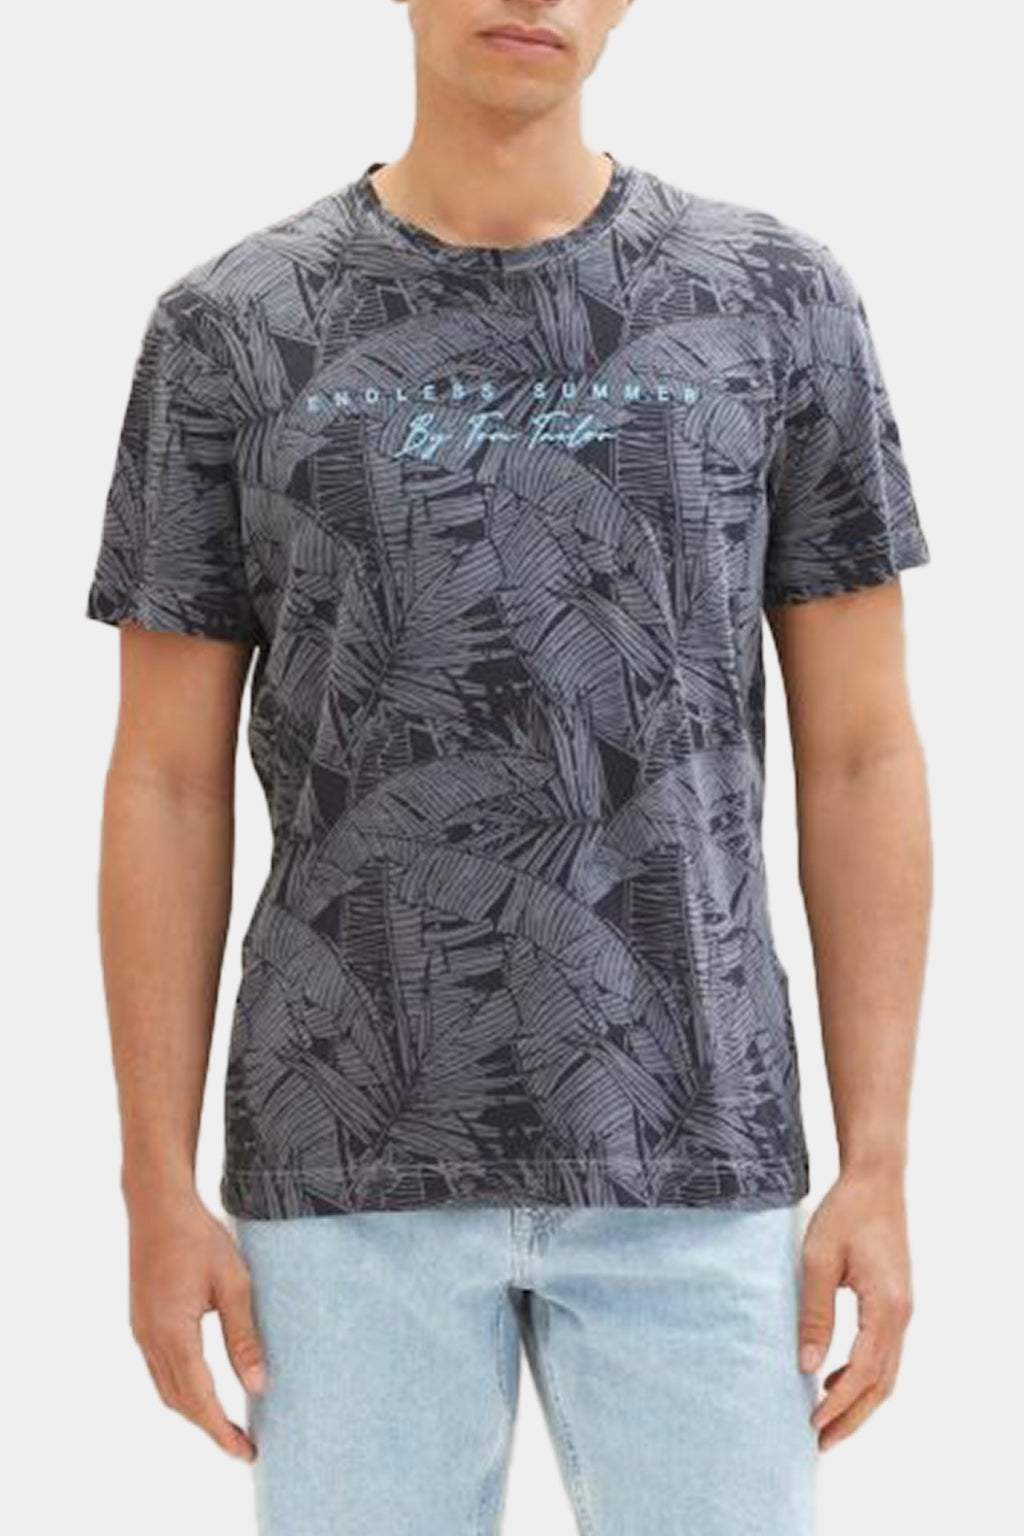 Tom Tailor - All-over Printed T-shirt